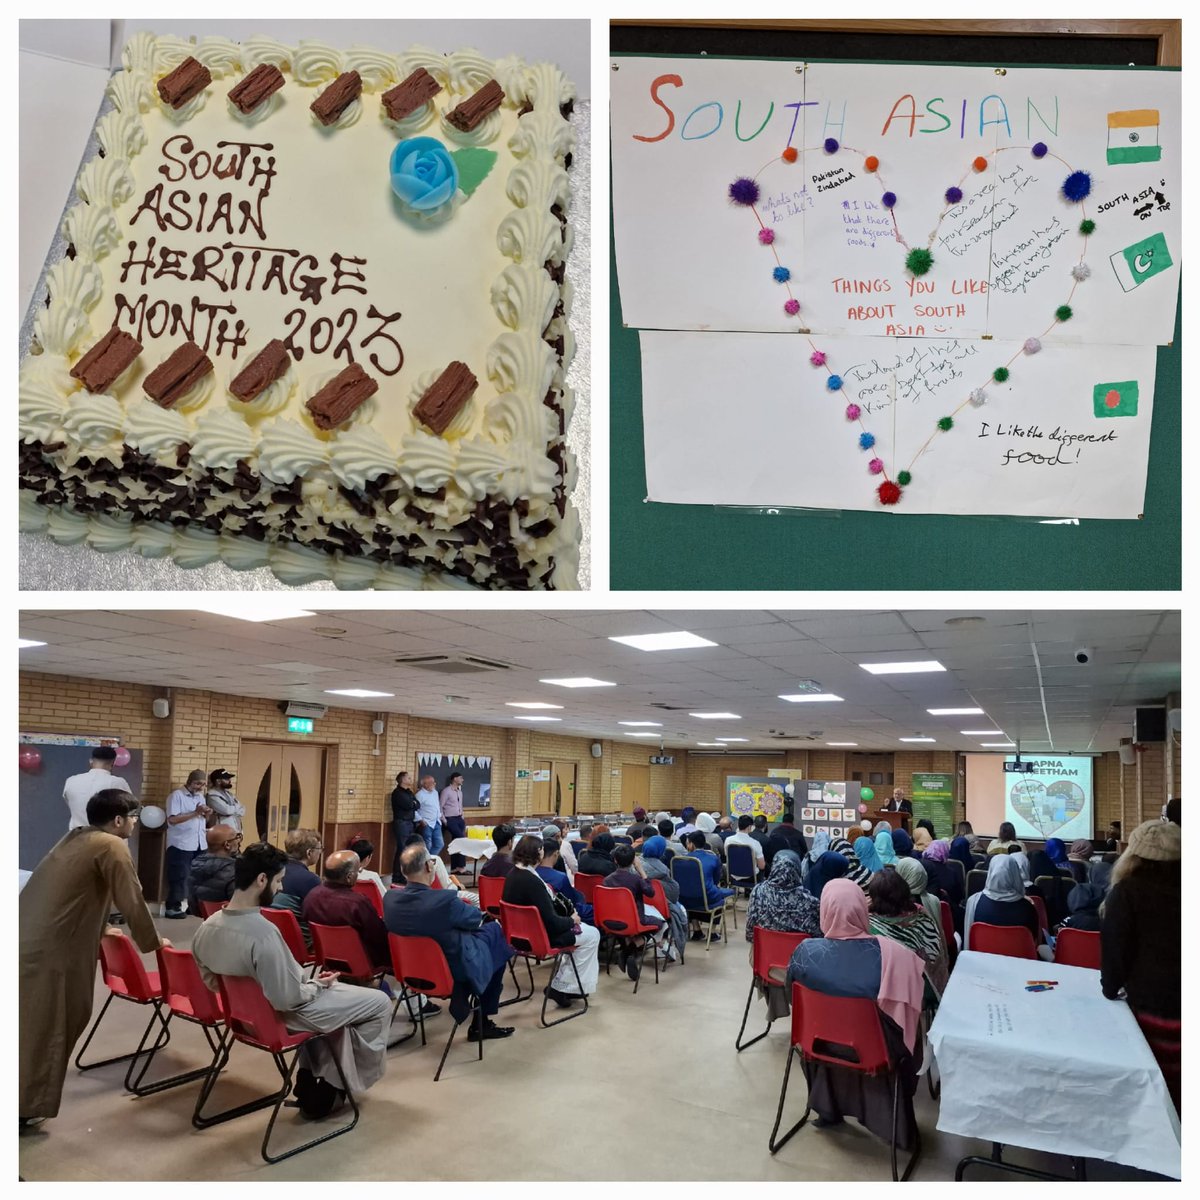 Thanks to all those who attended the #SouthAsianHeritageMonth event held in the Khizra Mosque community hall. A big well done to all the young speakers and performers. @muzahidukhan @Yasmine_Dar @ManCityCouncil @UNICEF @_SkillsForLife_ @jafhussain20 #communitycohesion